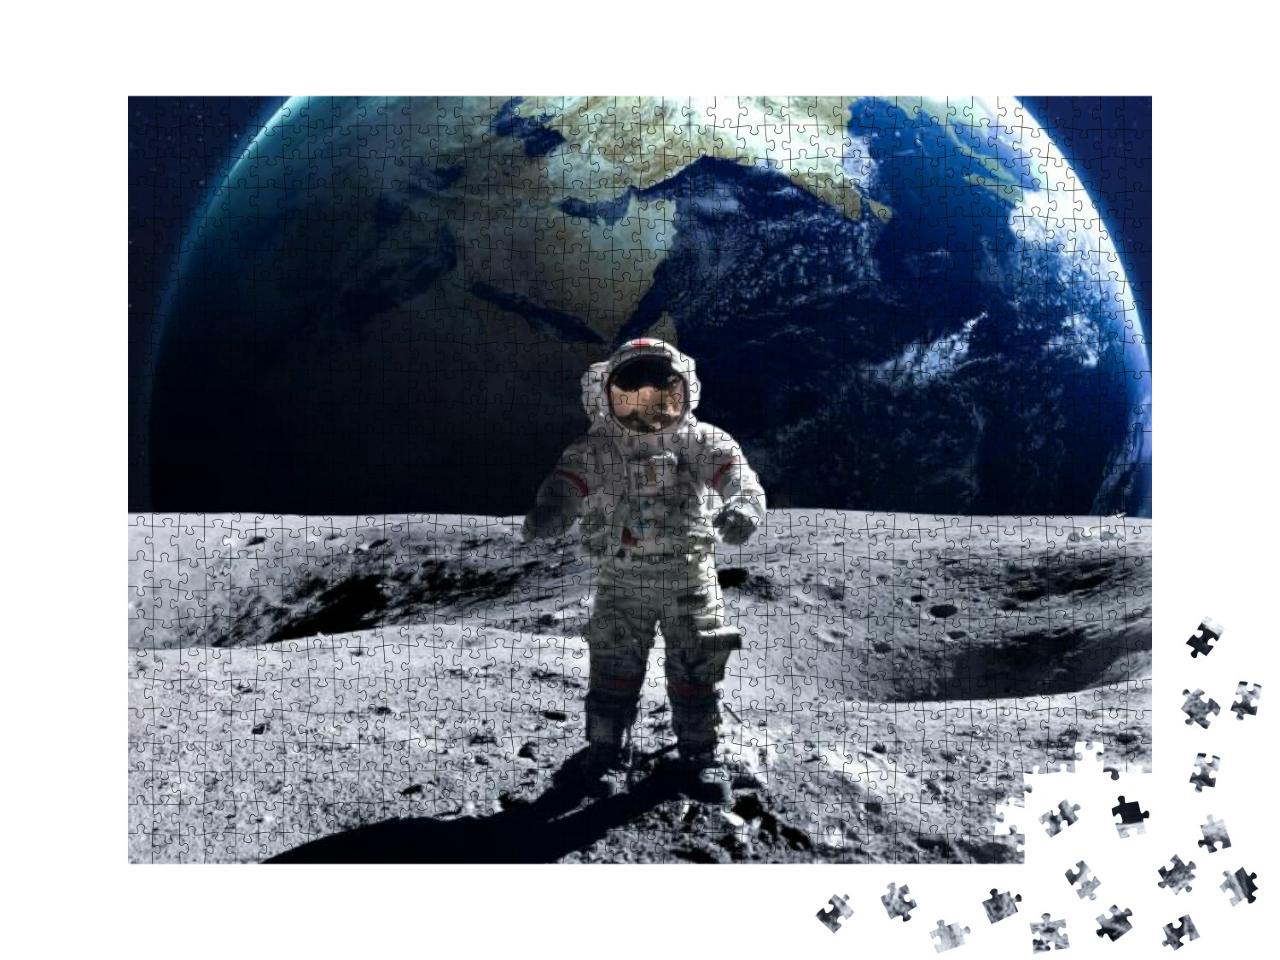 Brave Astronaut At the Spacewalk on the Moon. This Image... Jigsaw Puzzle with 1000 pieces